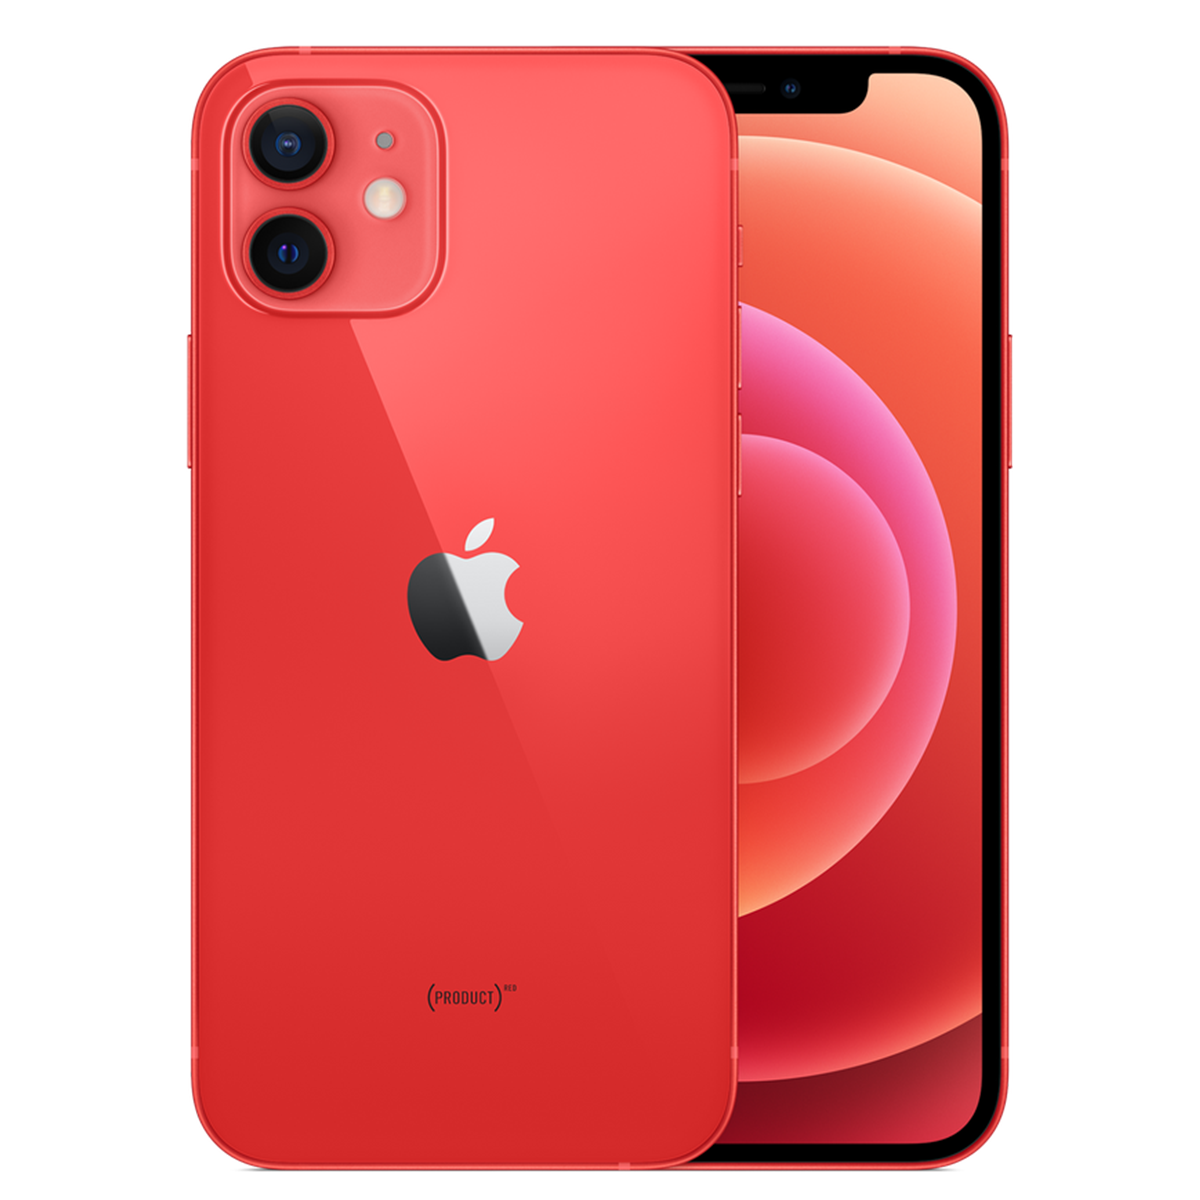 iPhone 12, (PRODUCT)Red, 128GB (Official Stock)